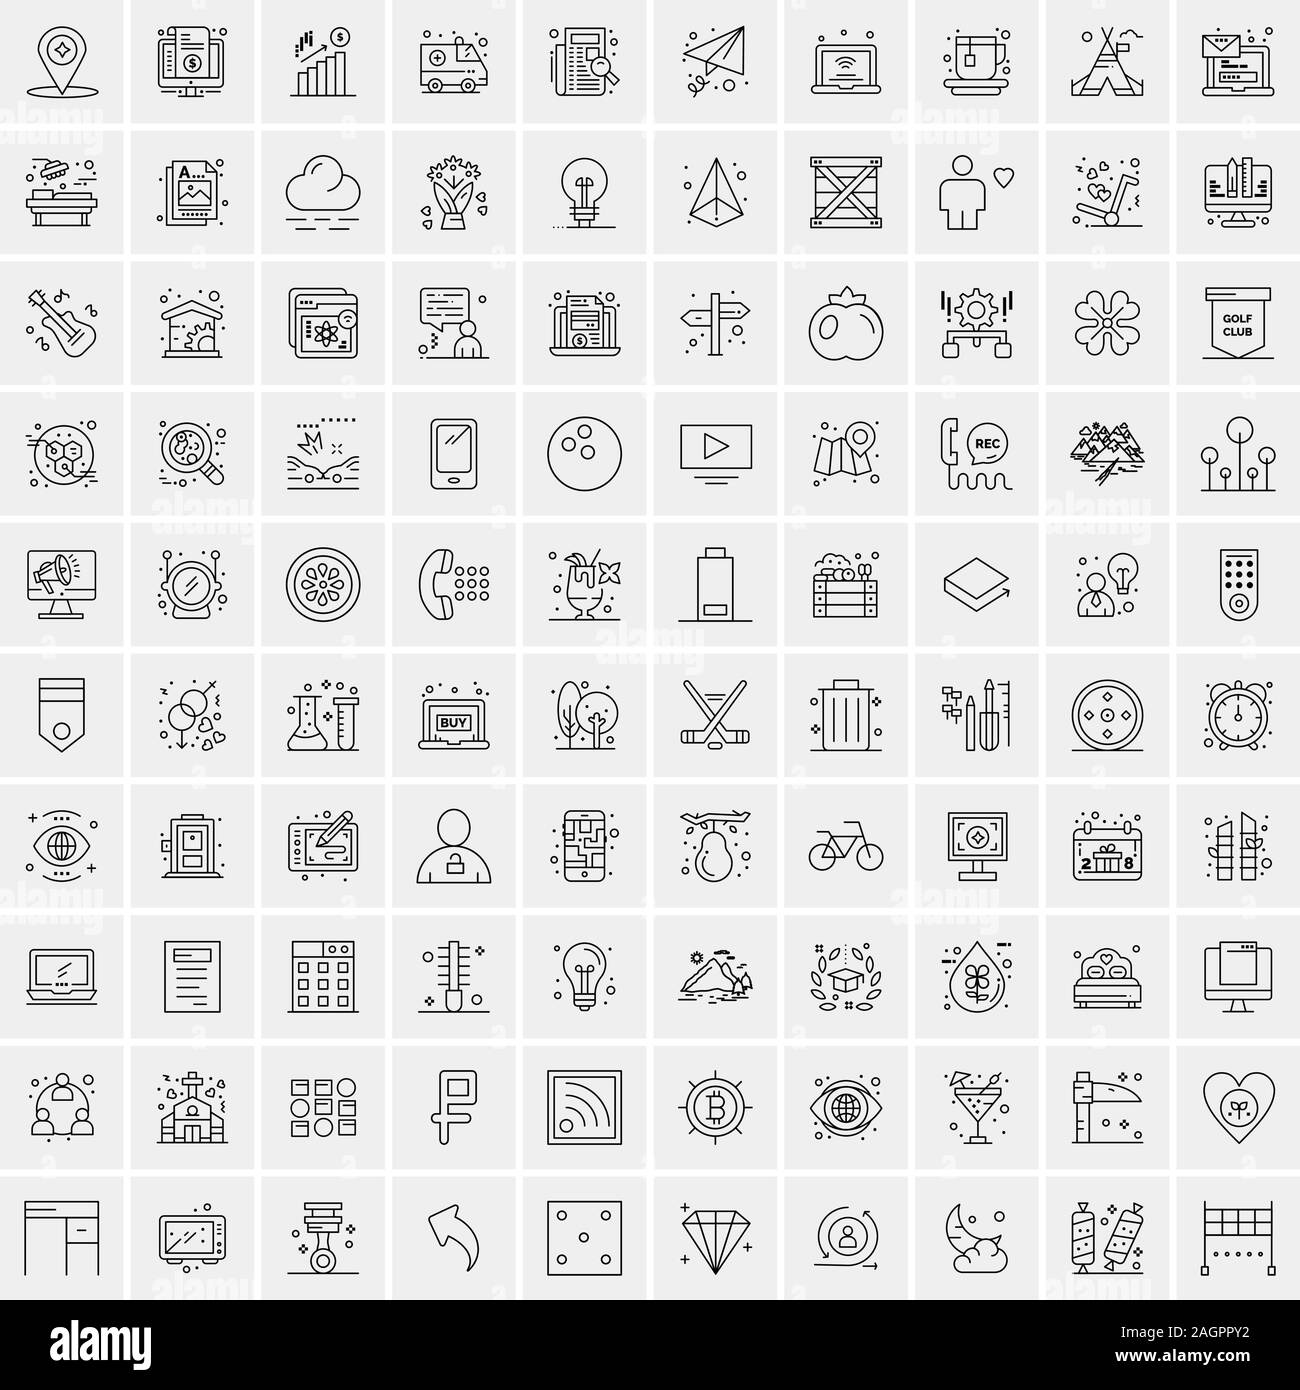 Set of 100 Creative Business Line Icons Stock Vector